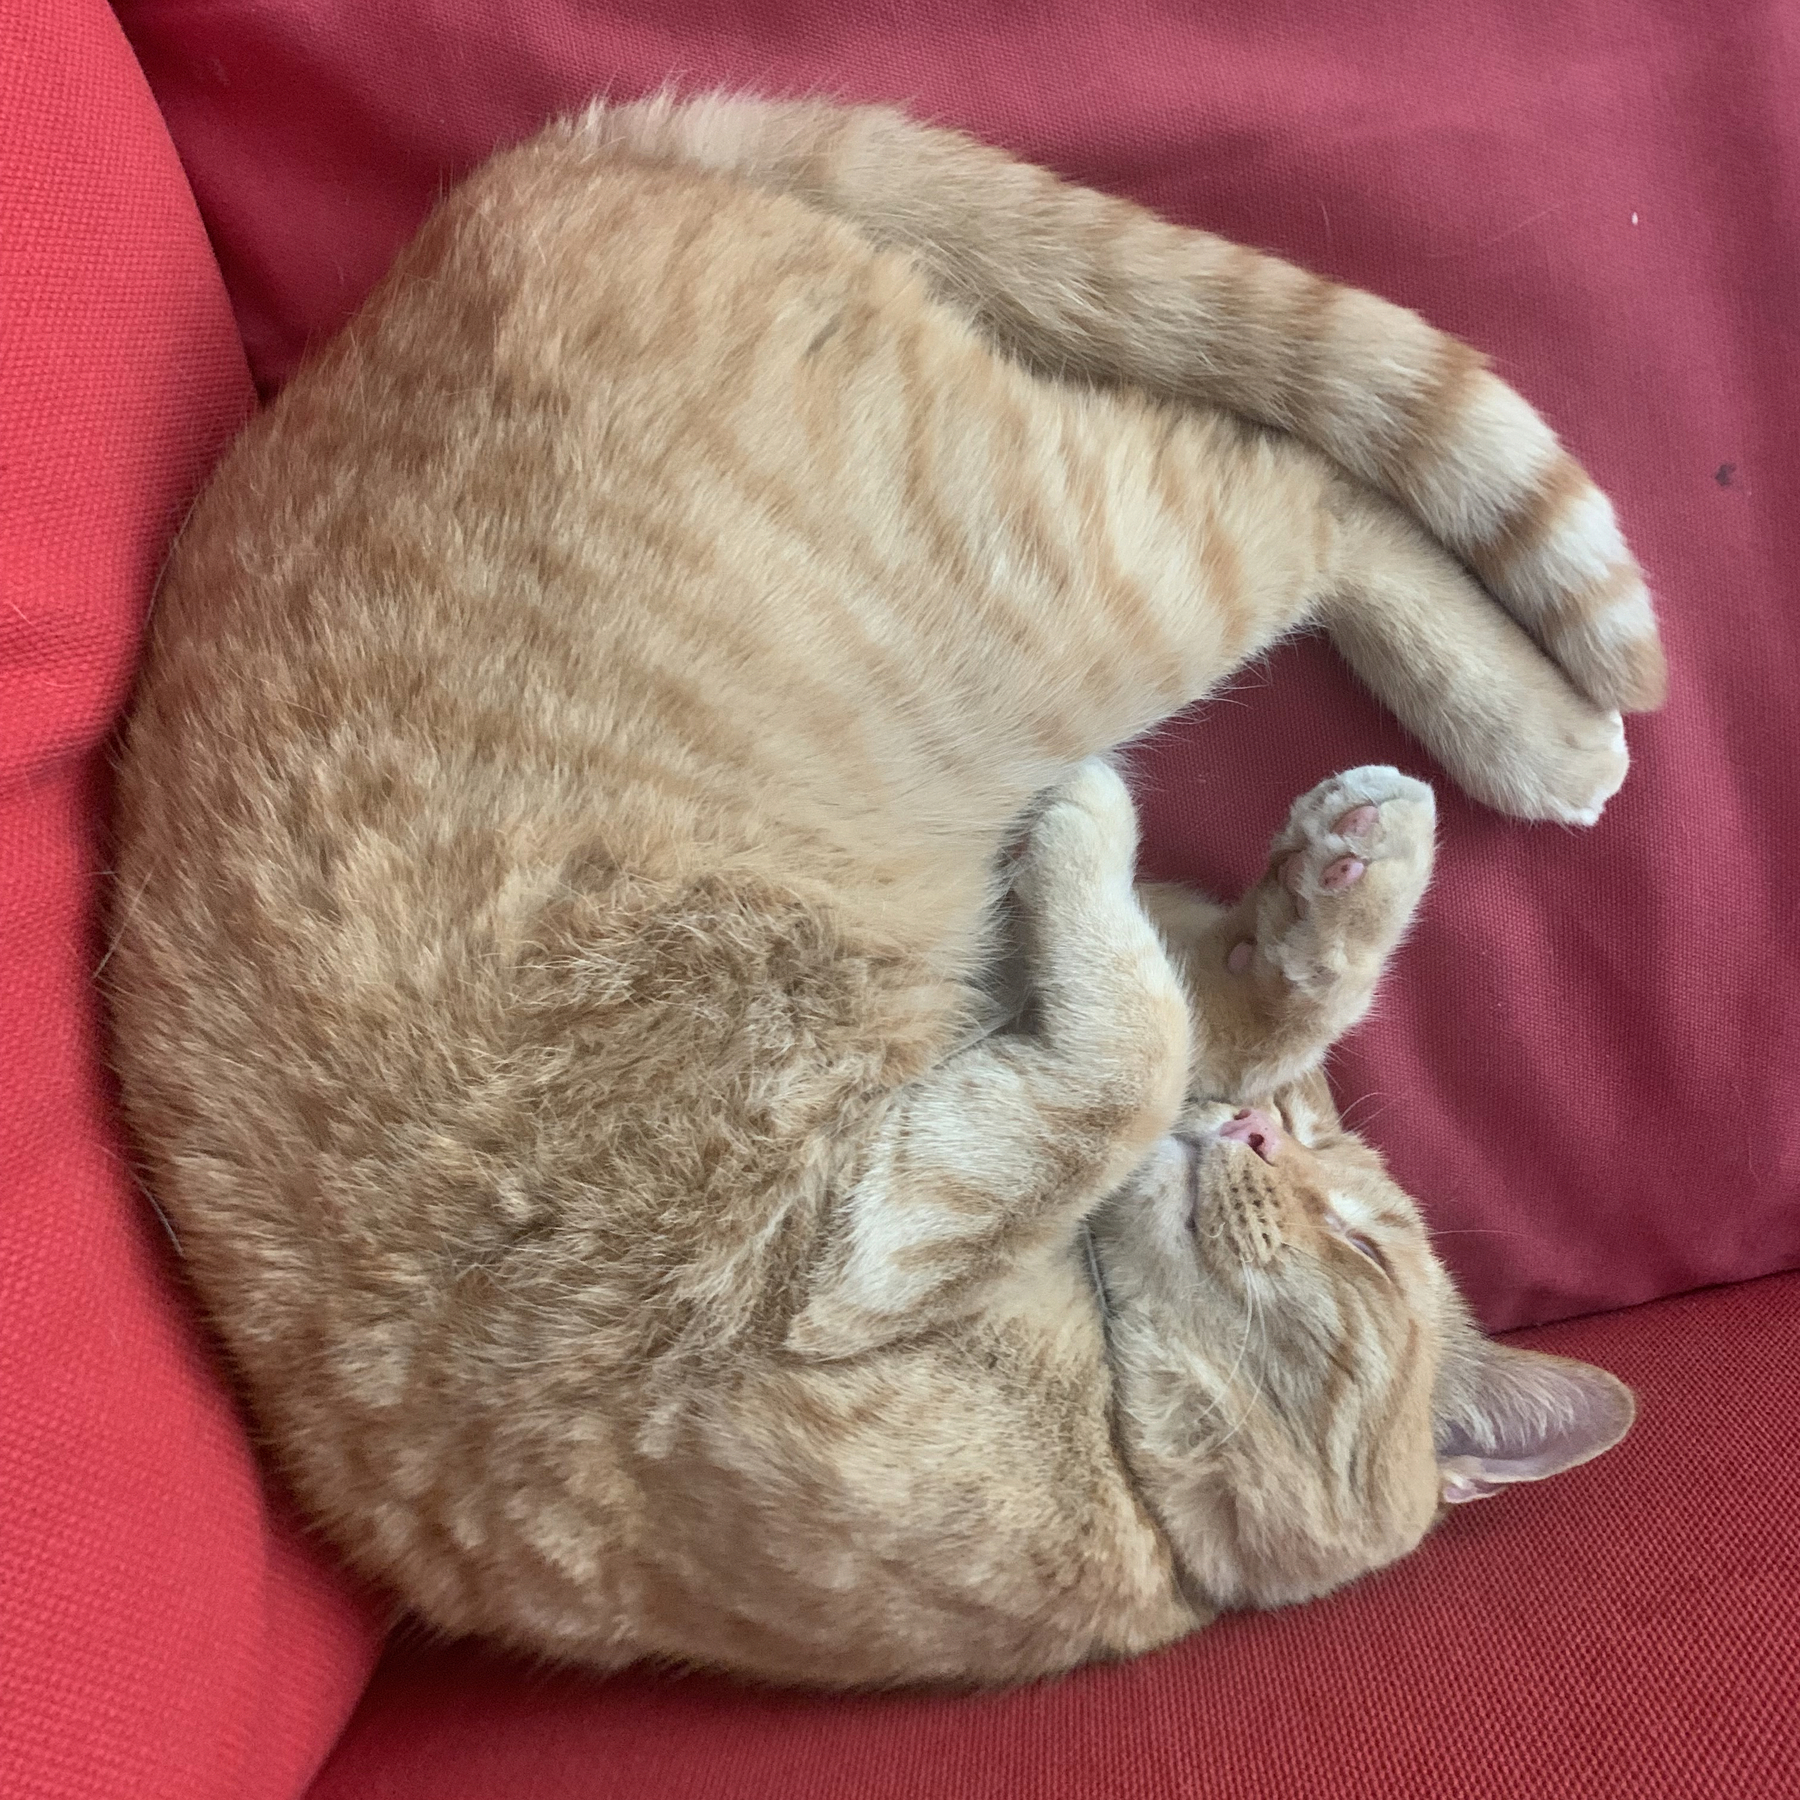 An orange taby cat curled up into a circle.